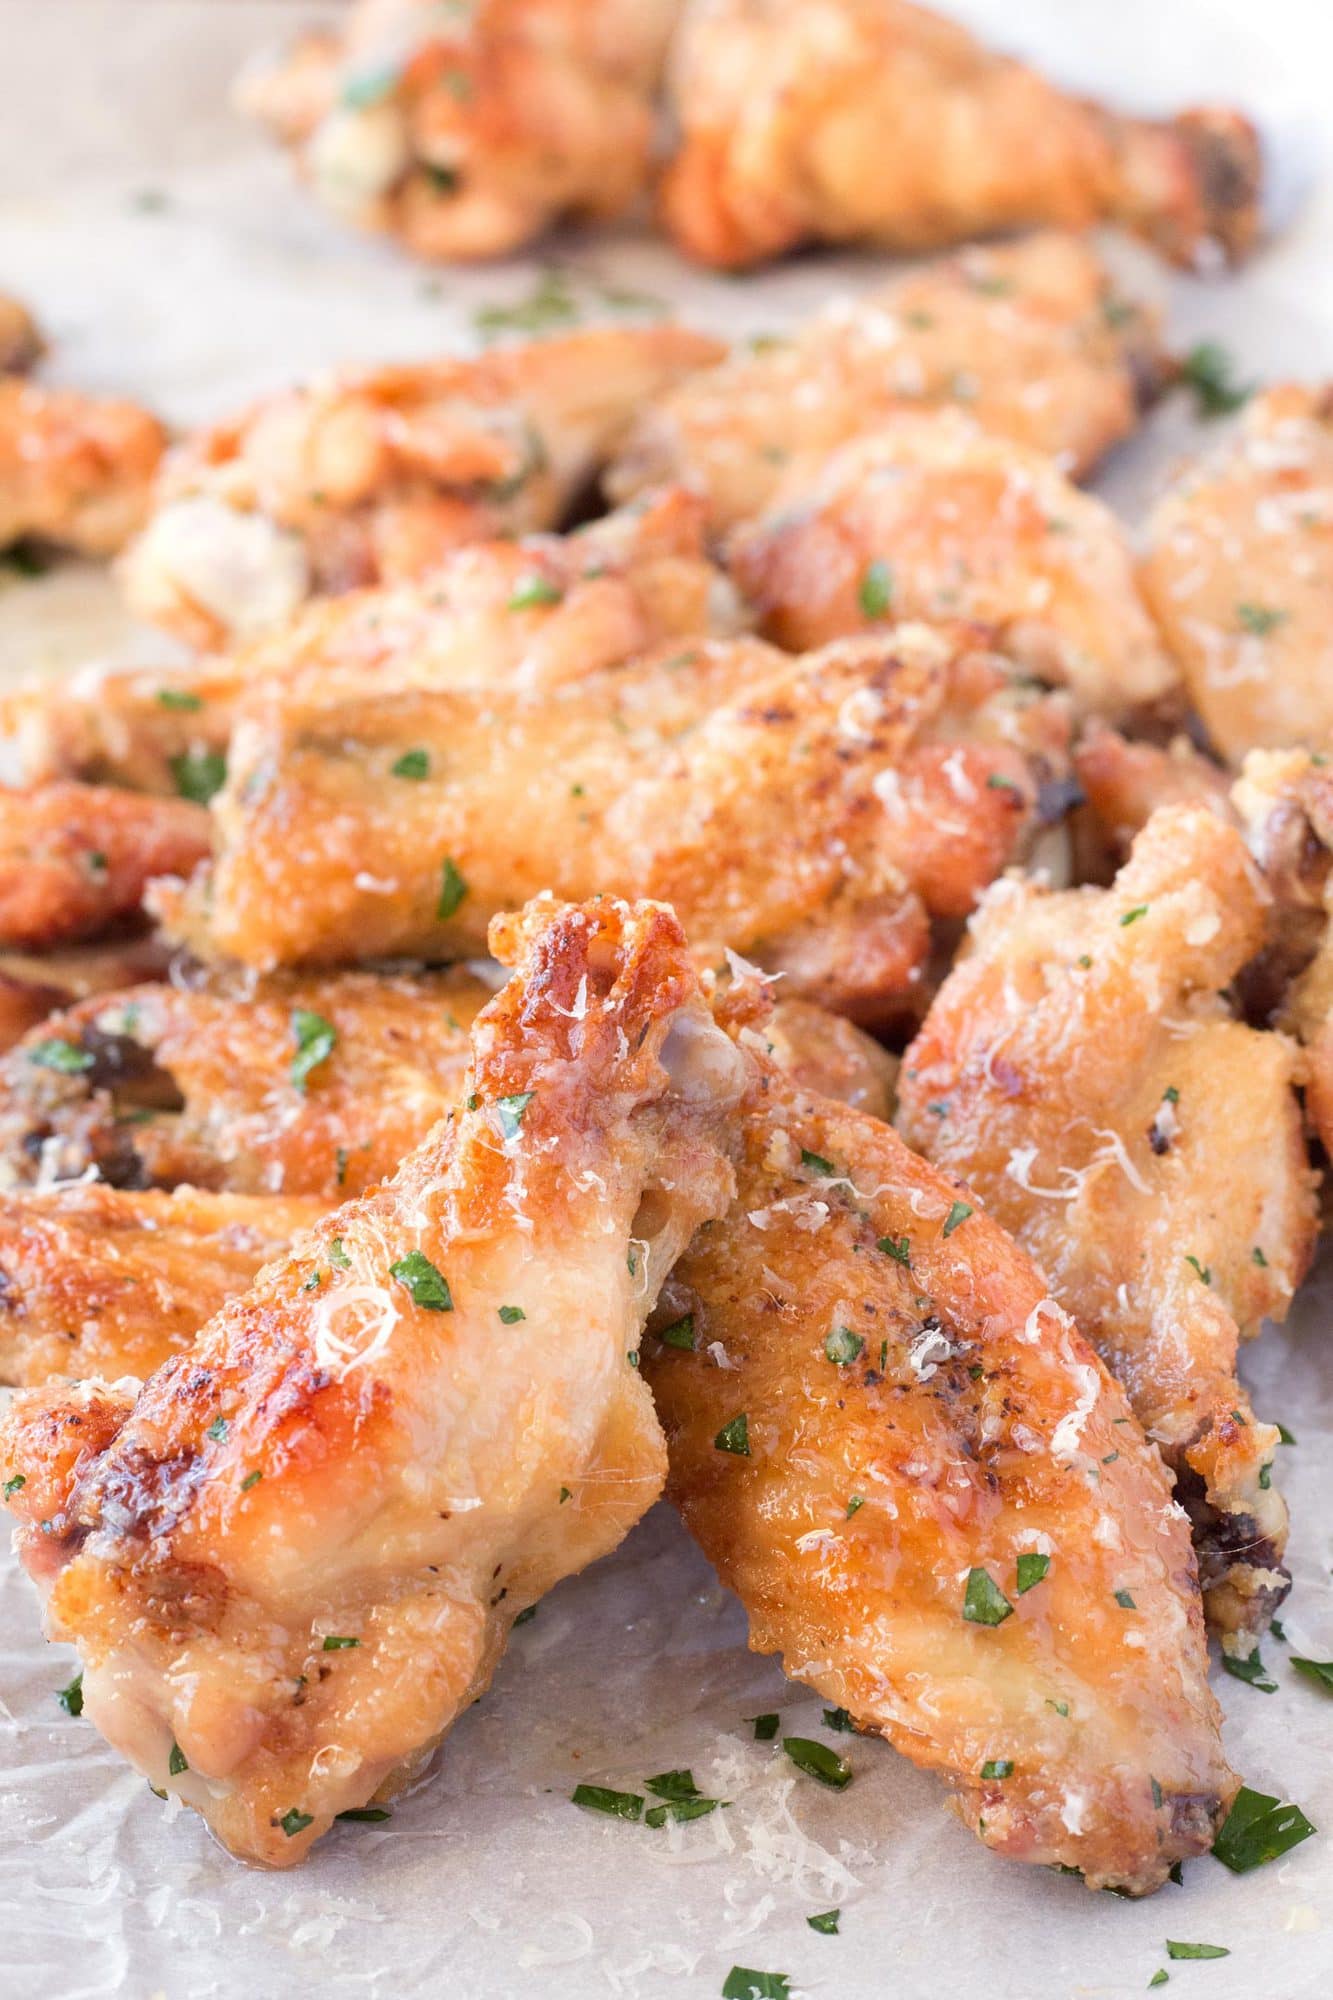 Crispy Baked Chicken Wings with garlic parmesan sauce on parchment paper